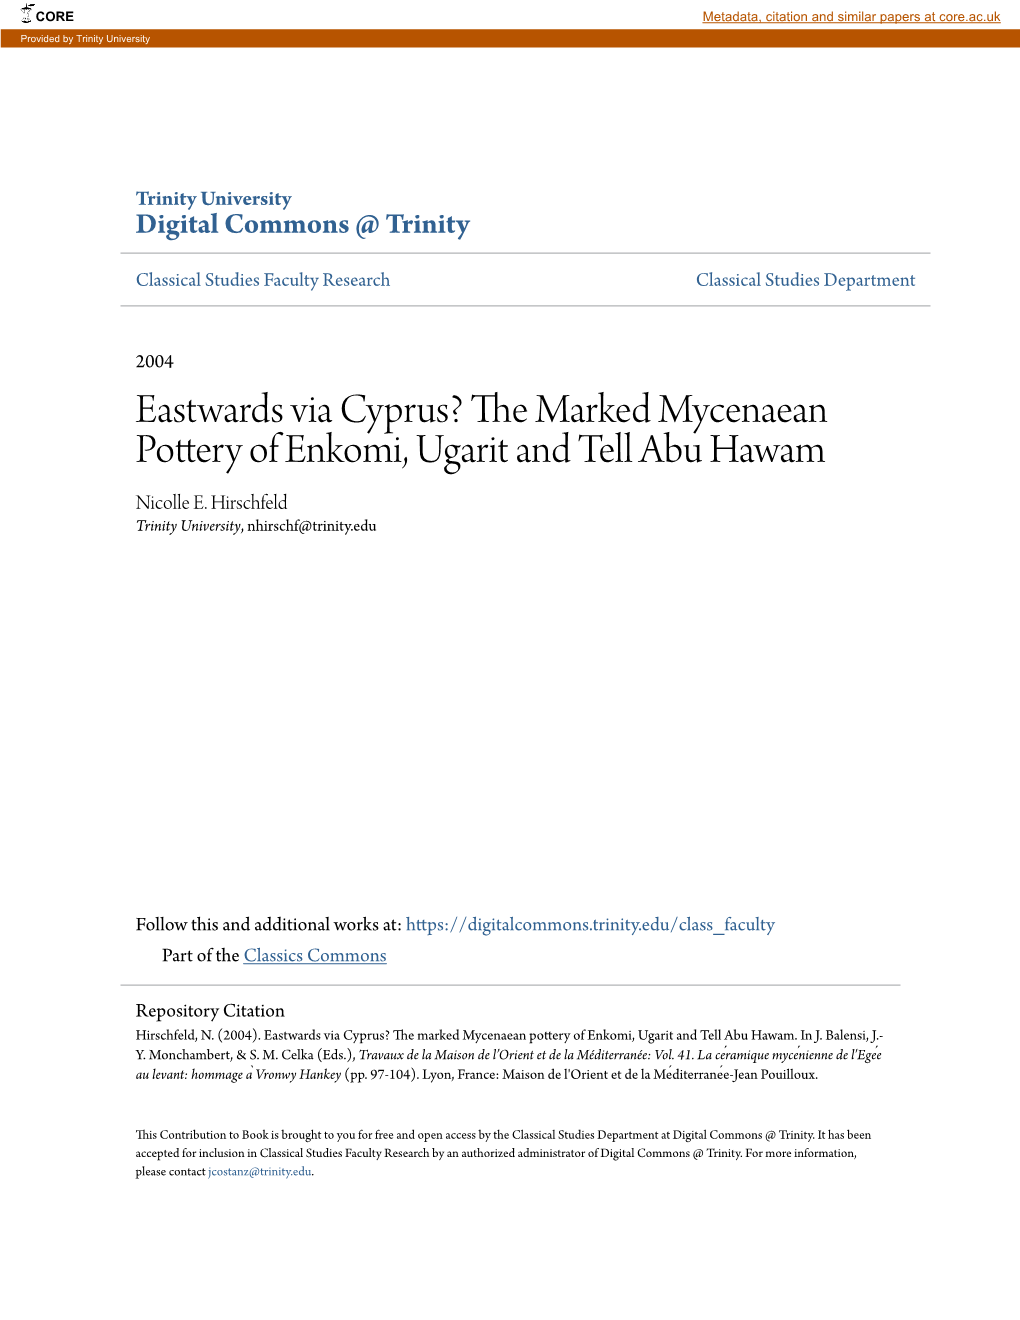 The Marked Mycenaean Pottery of Enkomi, Ugarit and Tell